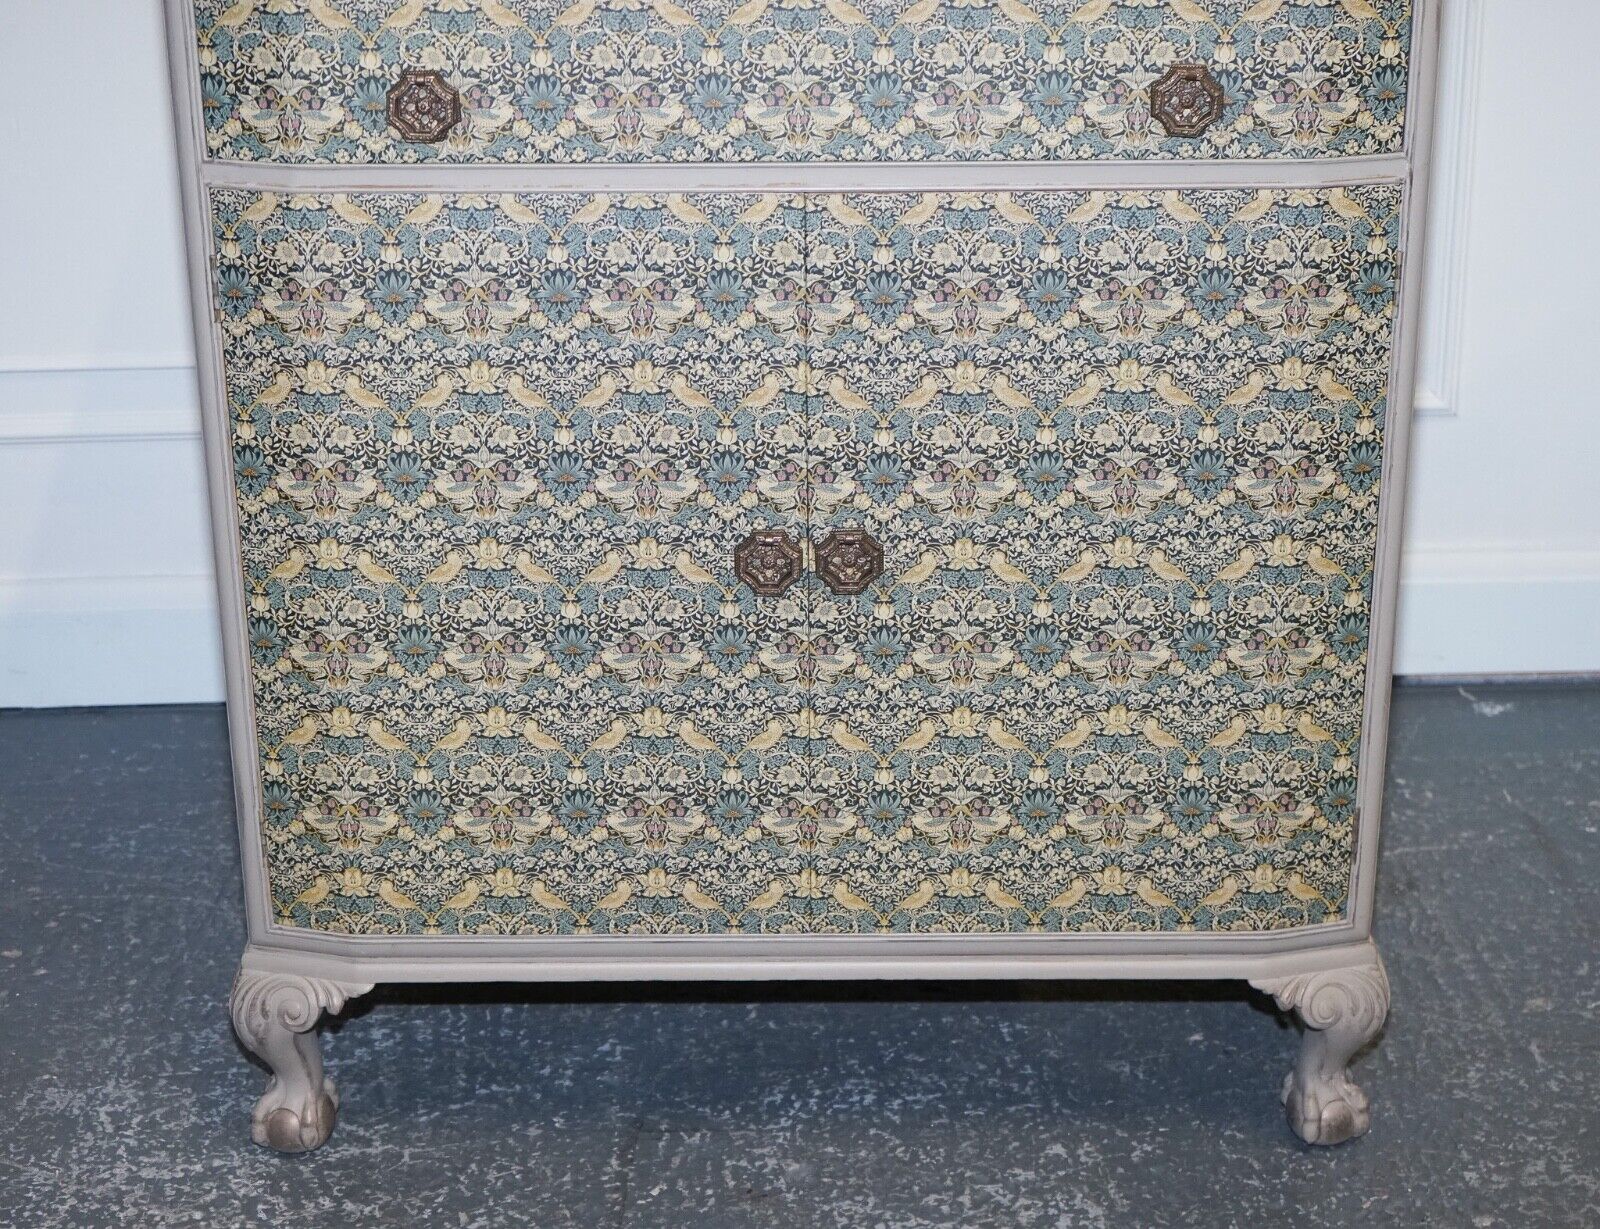 1930s WARING & GILLOW HAND PAINTED CHEST OF DRAWERS CUPBOARD WILLIAM MORRIS